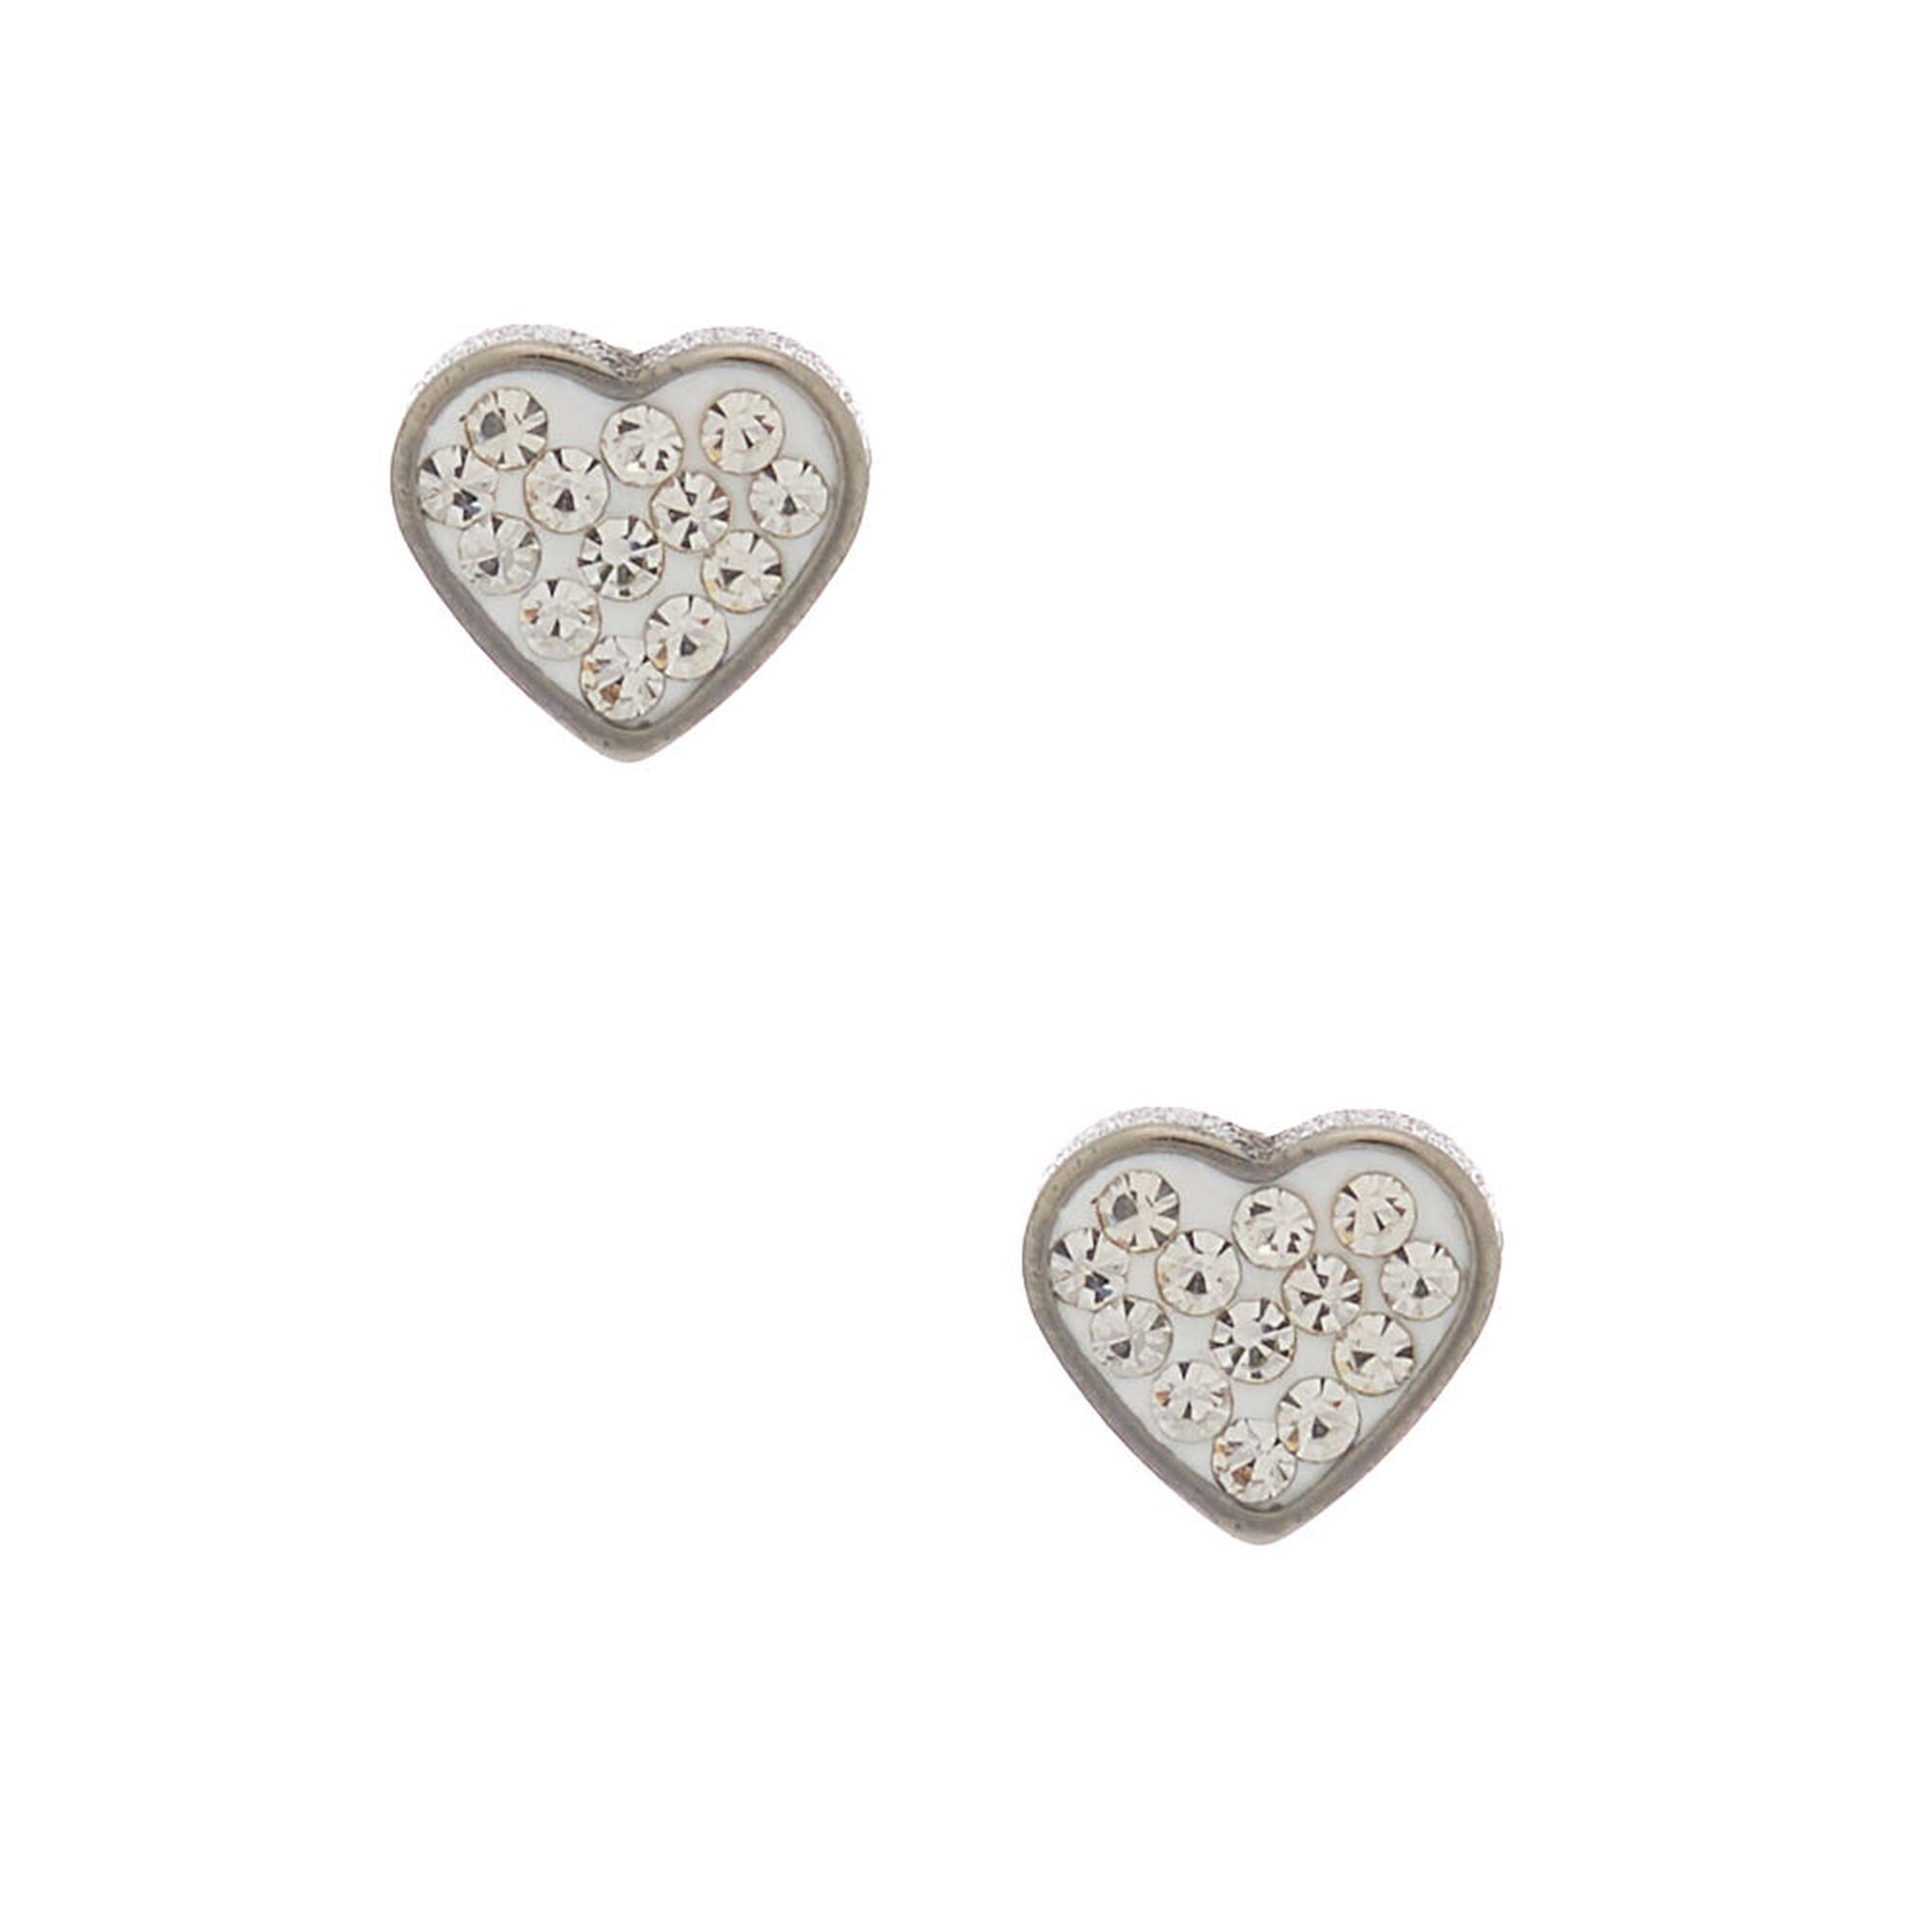 View Claires Silver Titanium Crystal Heart Stud Earrings White information